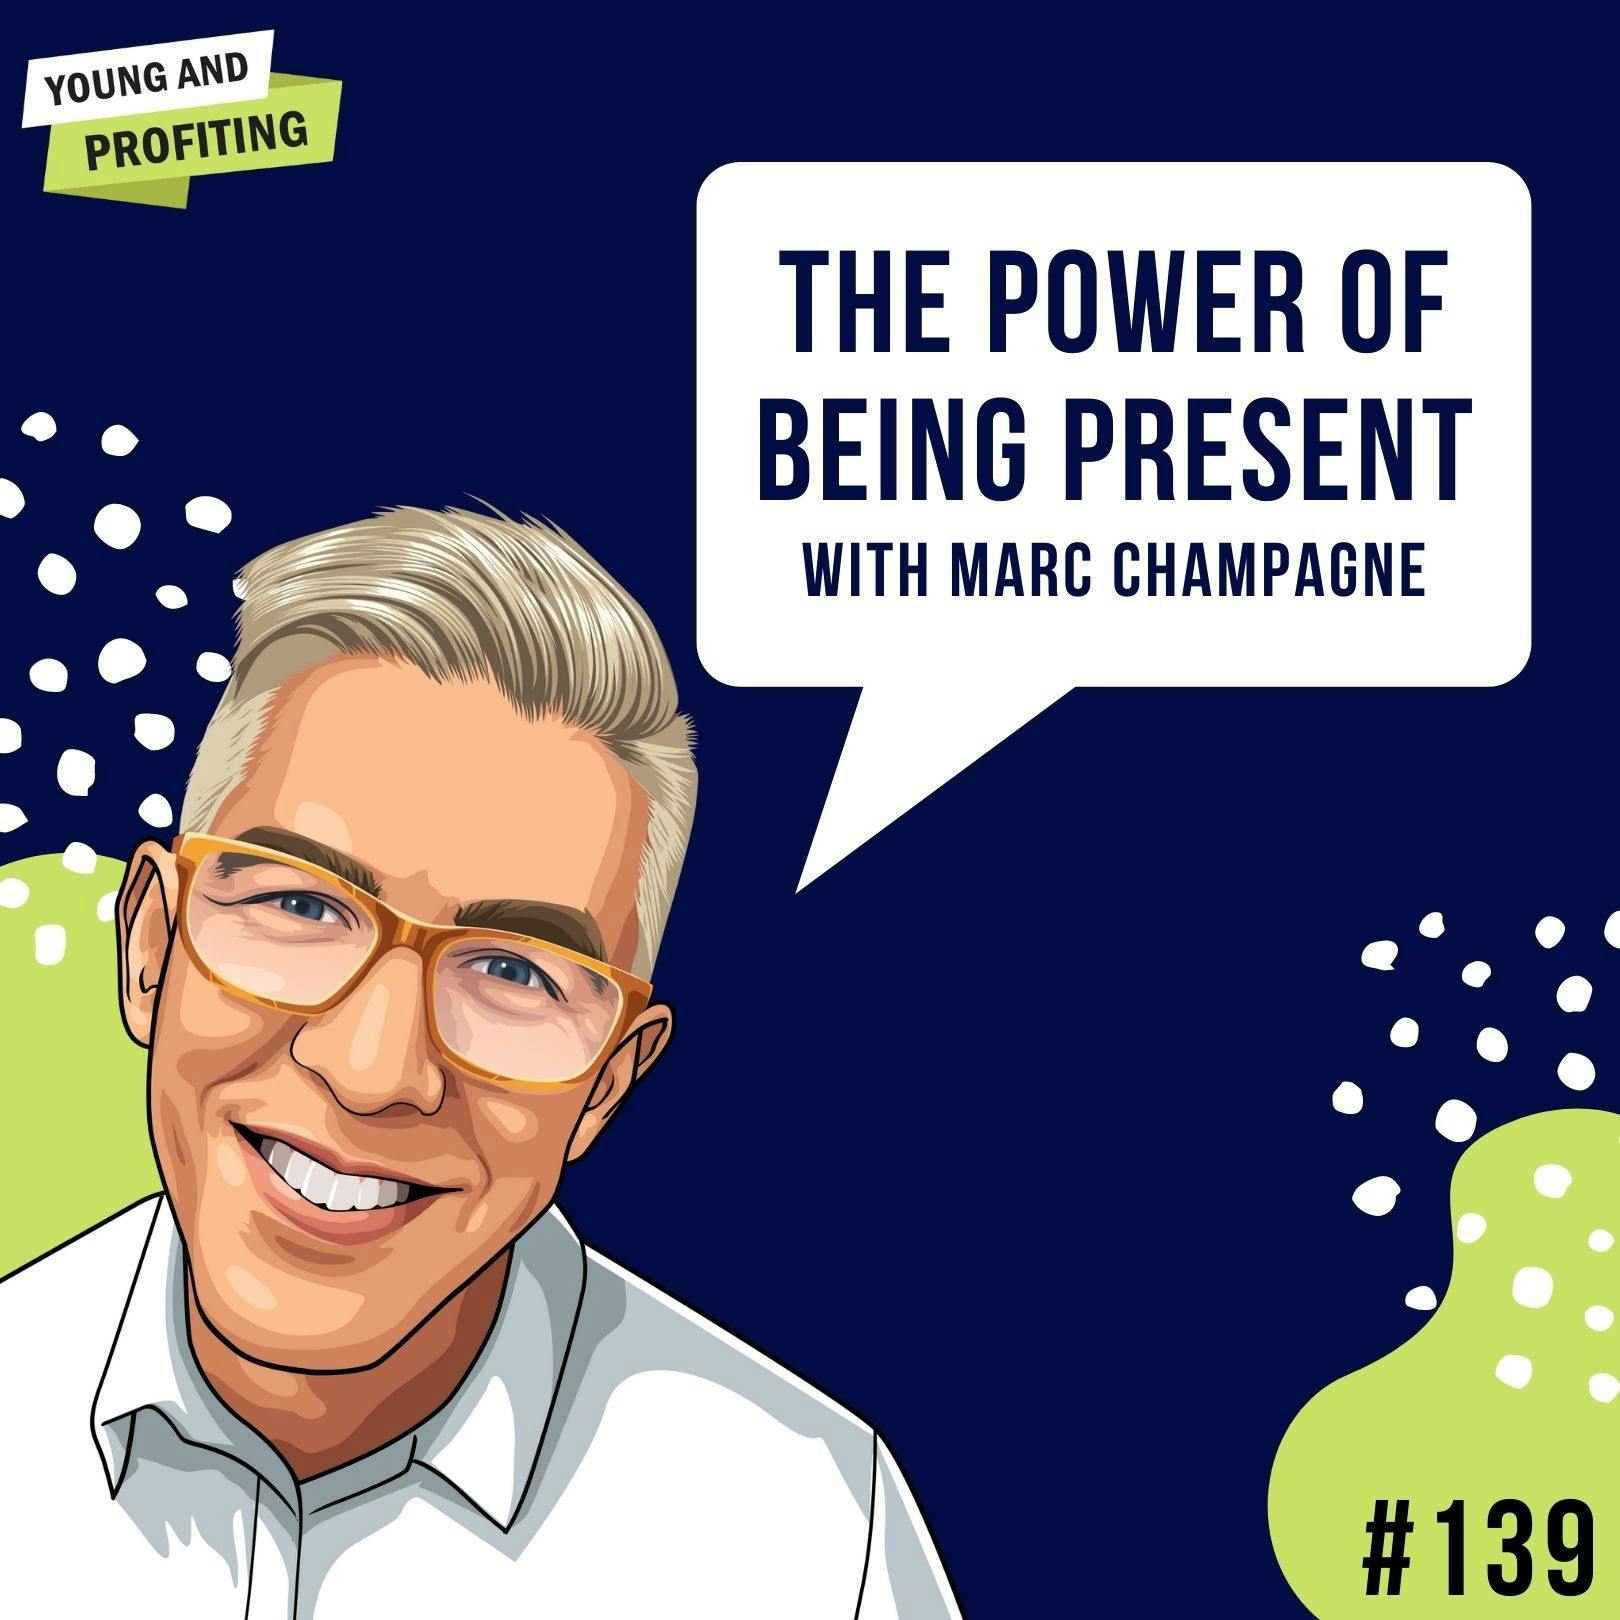 Marc Champagne: The Power of Being Present | E139 by Hala Taha | YAP Media Network